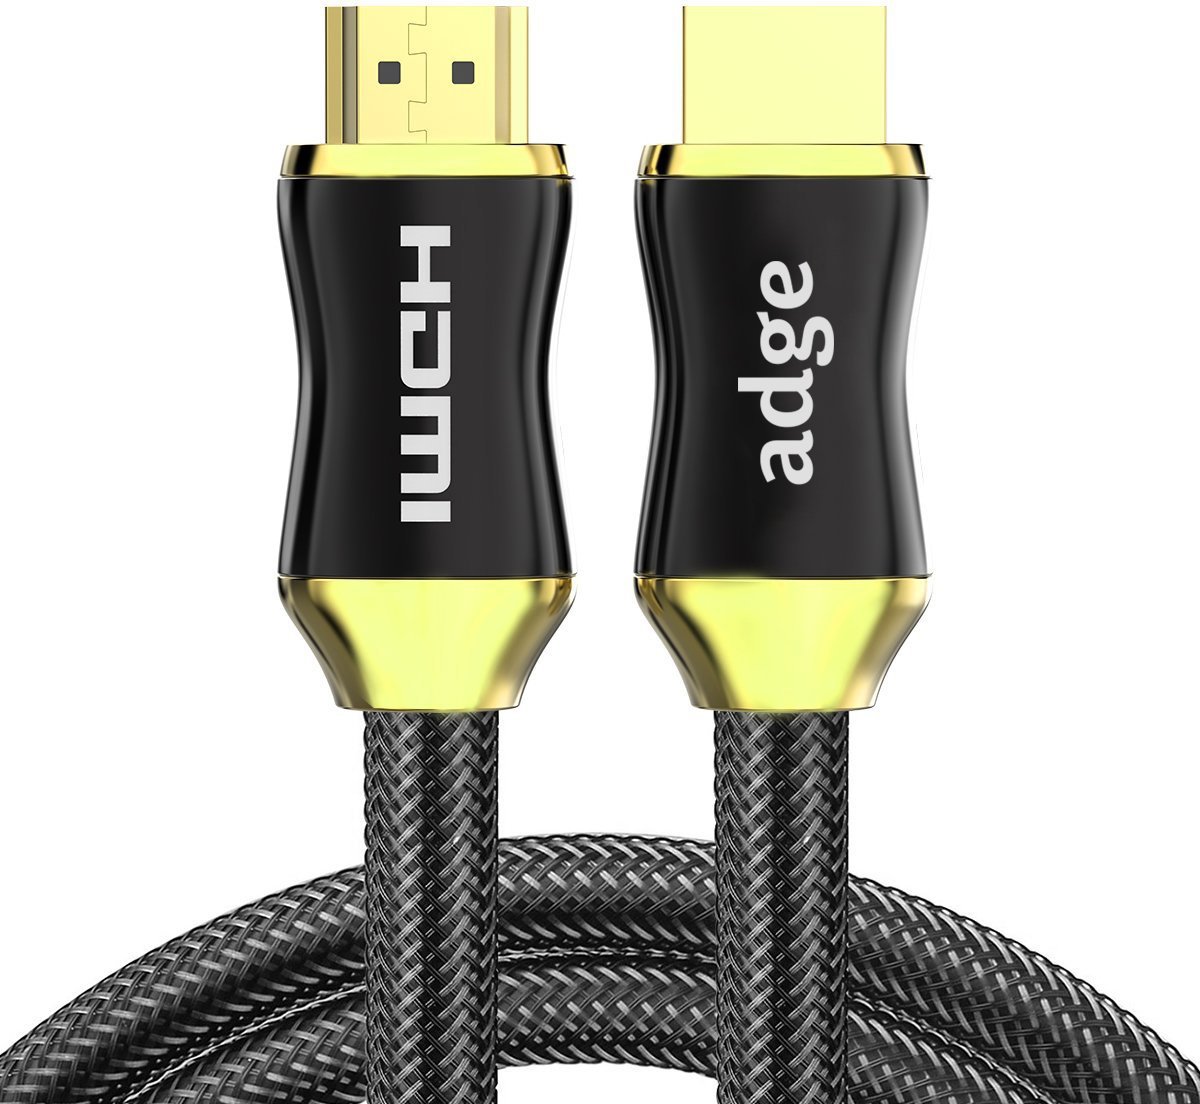 Adge� - HDMI Kabel 2.0 Gold Plated - High Speed Cable - 3 Meter